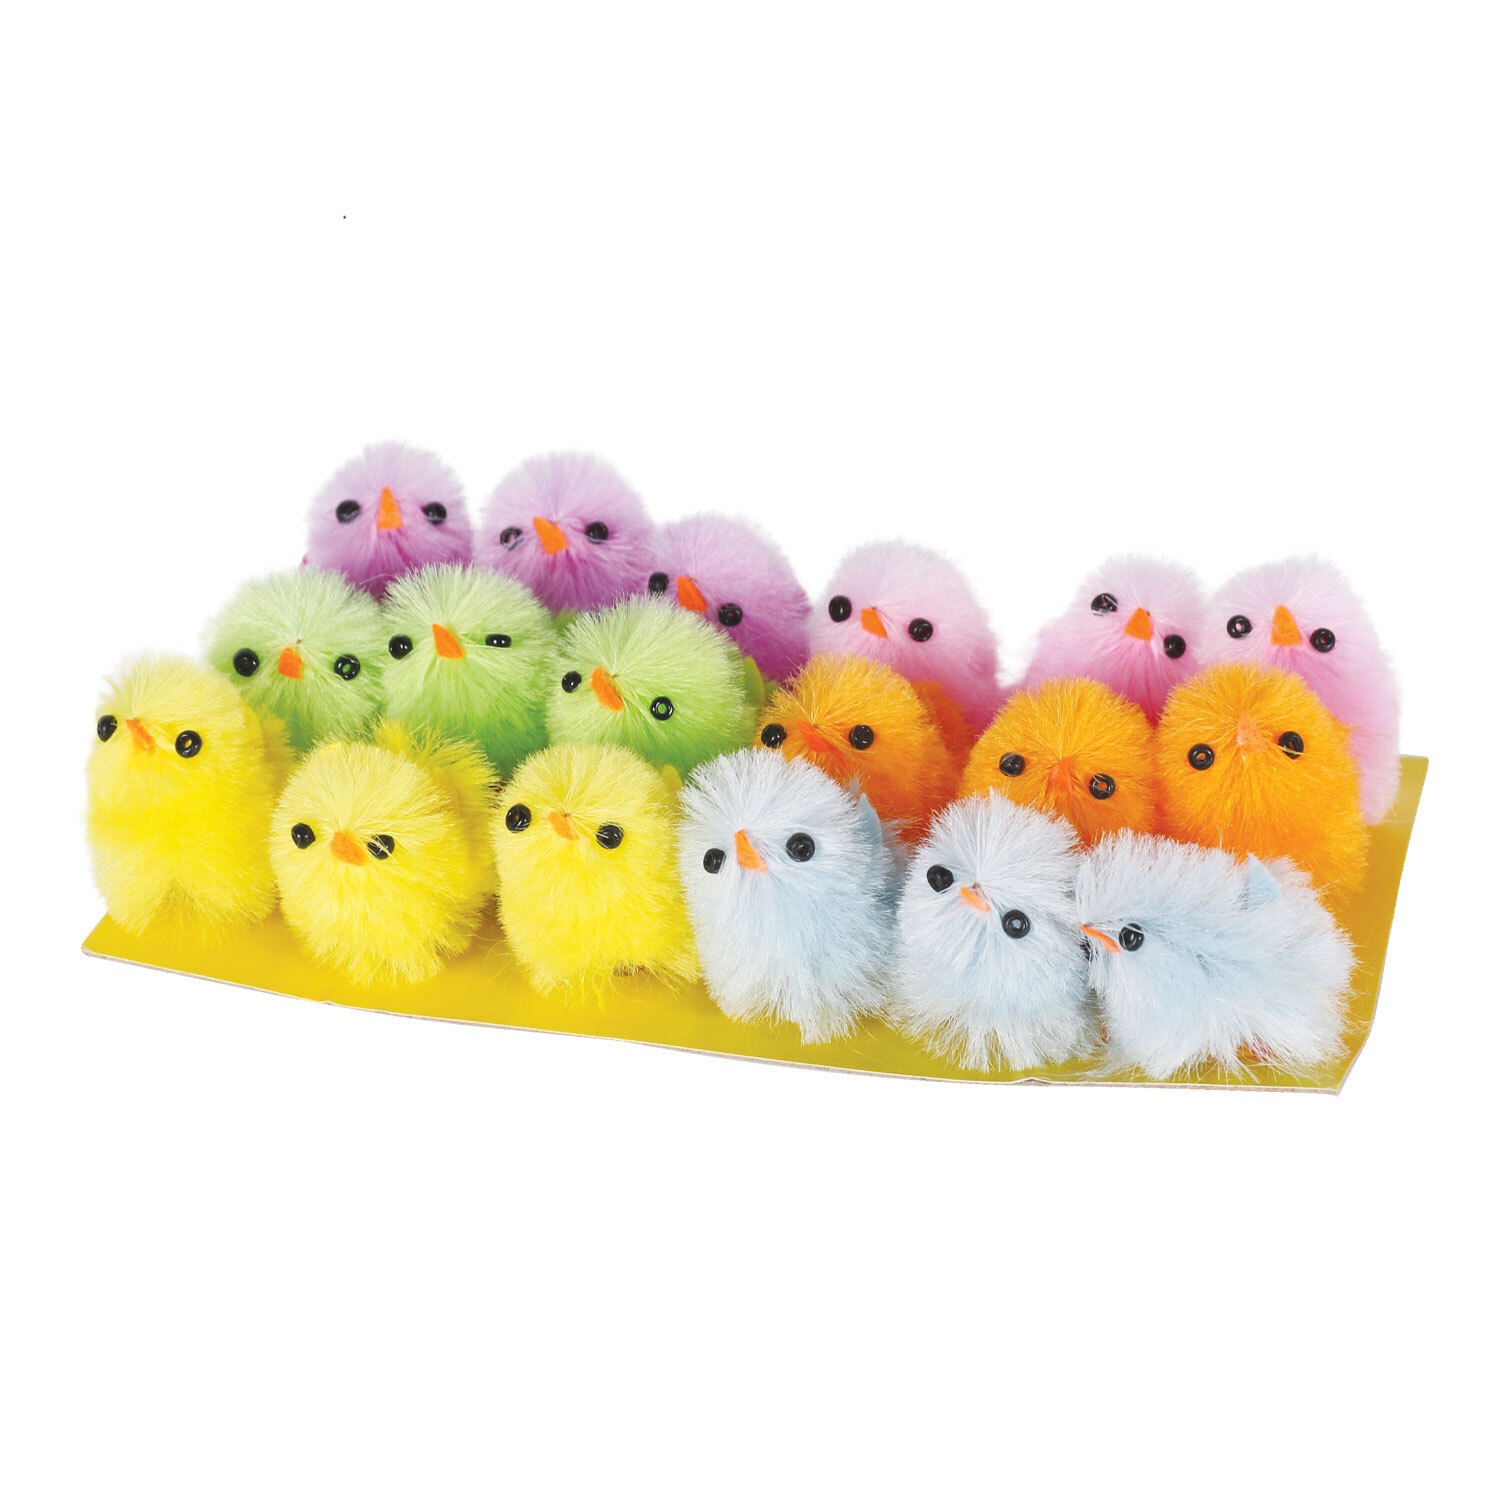 Easter Chick Decoration 18 Pack Image